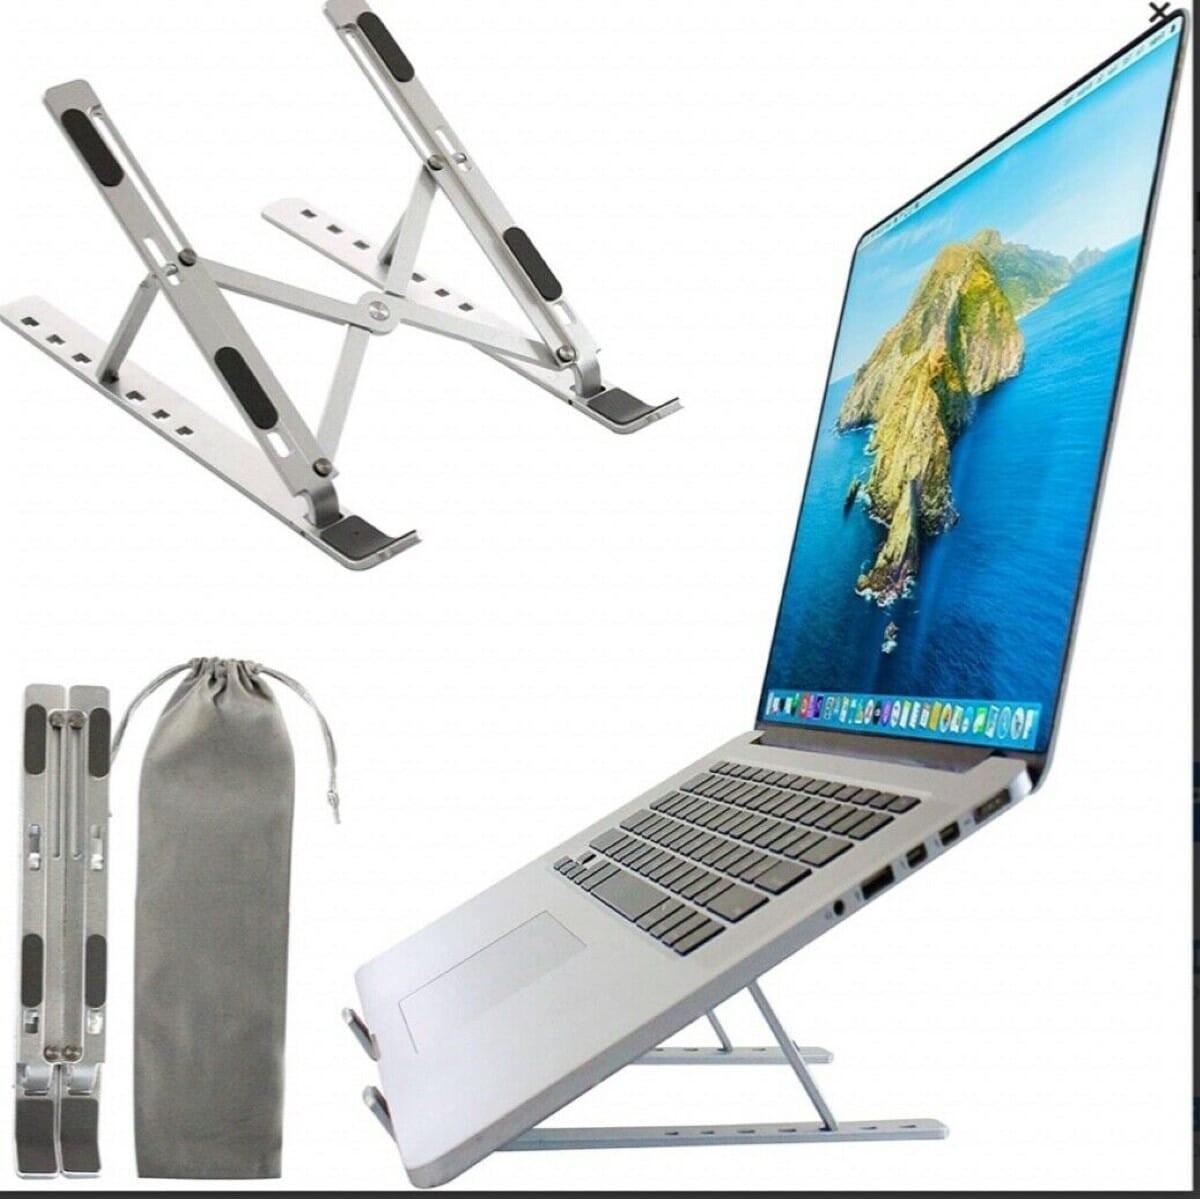 Aluminum Alloy 7-Level Adjustable Laptop Stand for 10 to 17 Inches Mackbook/Laptops